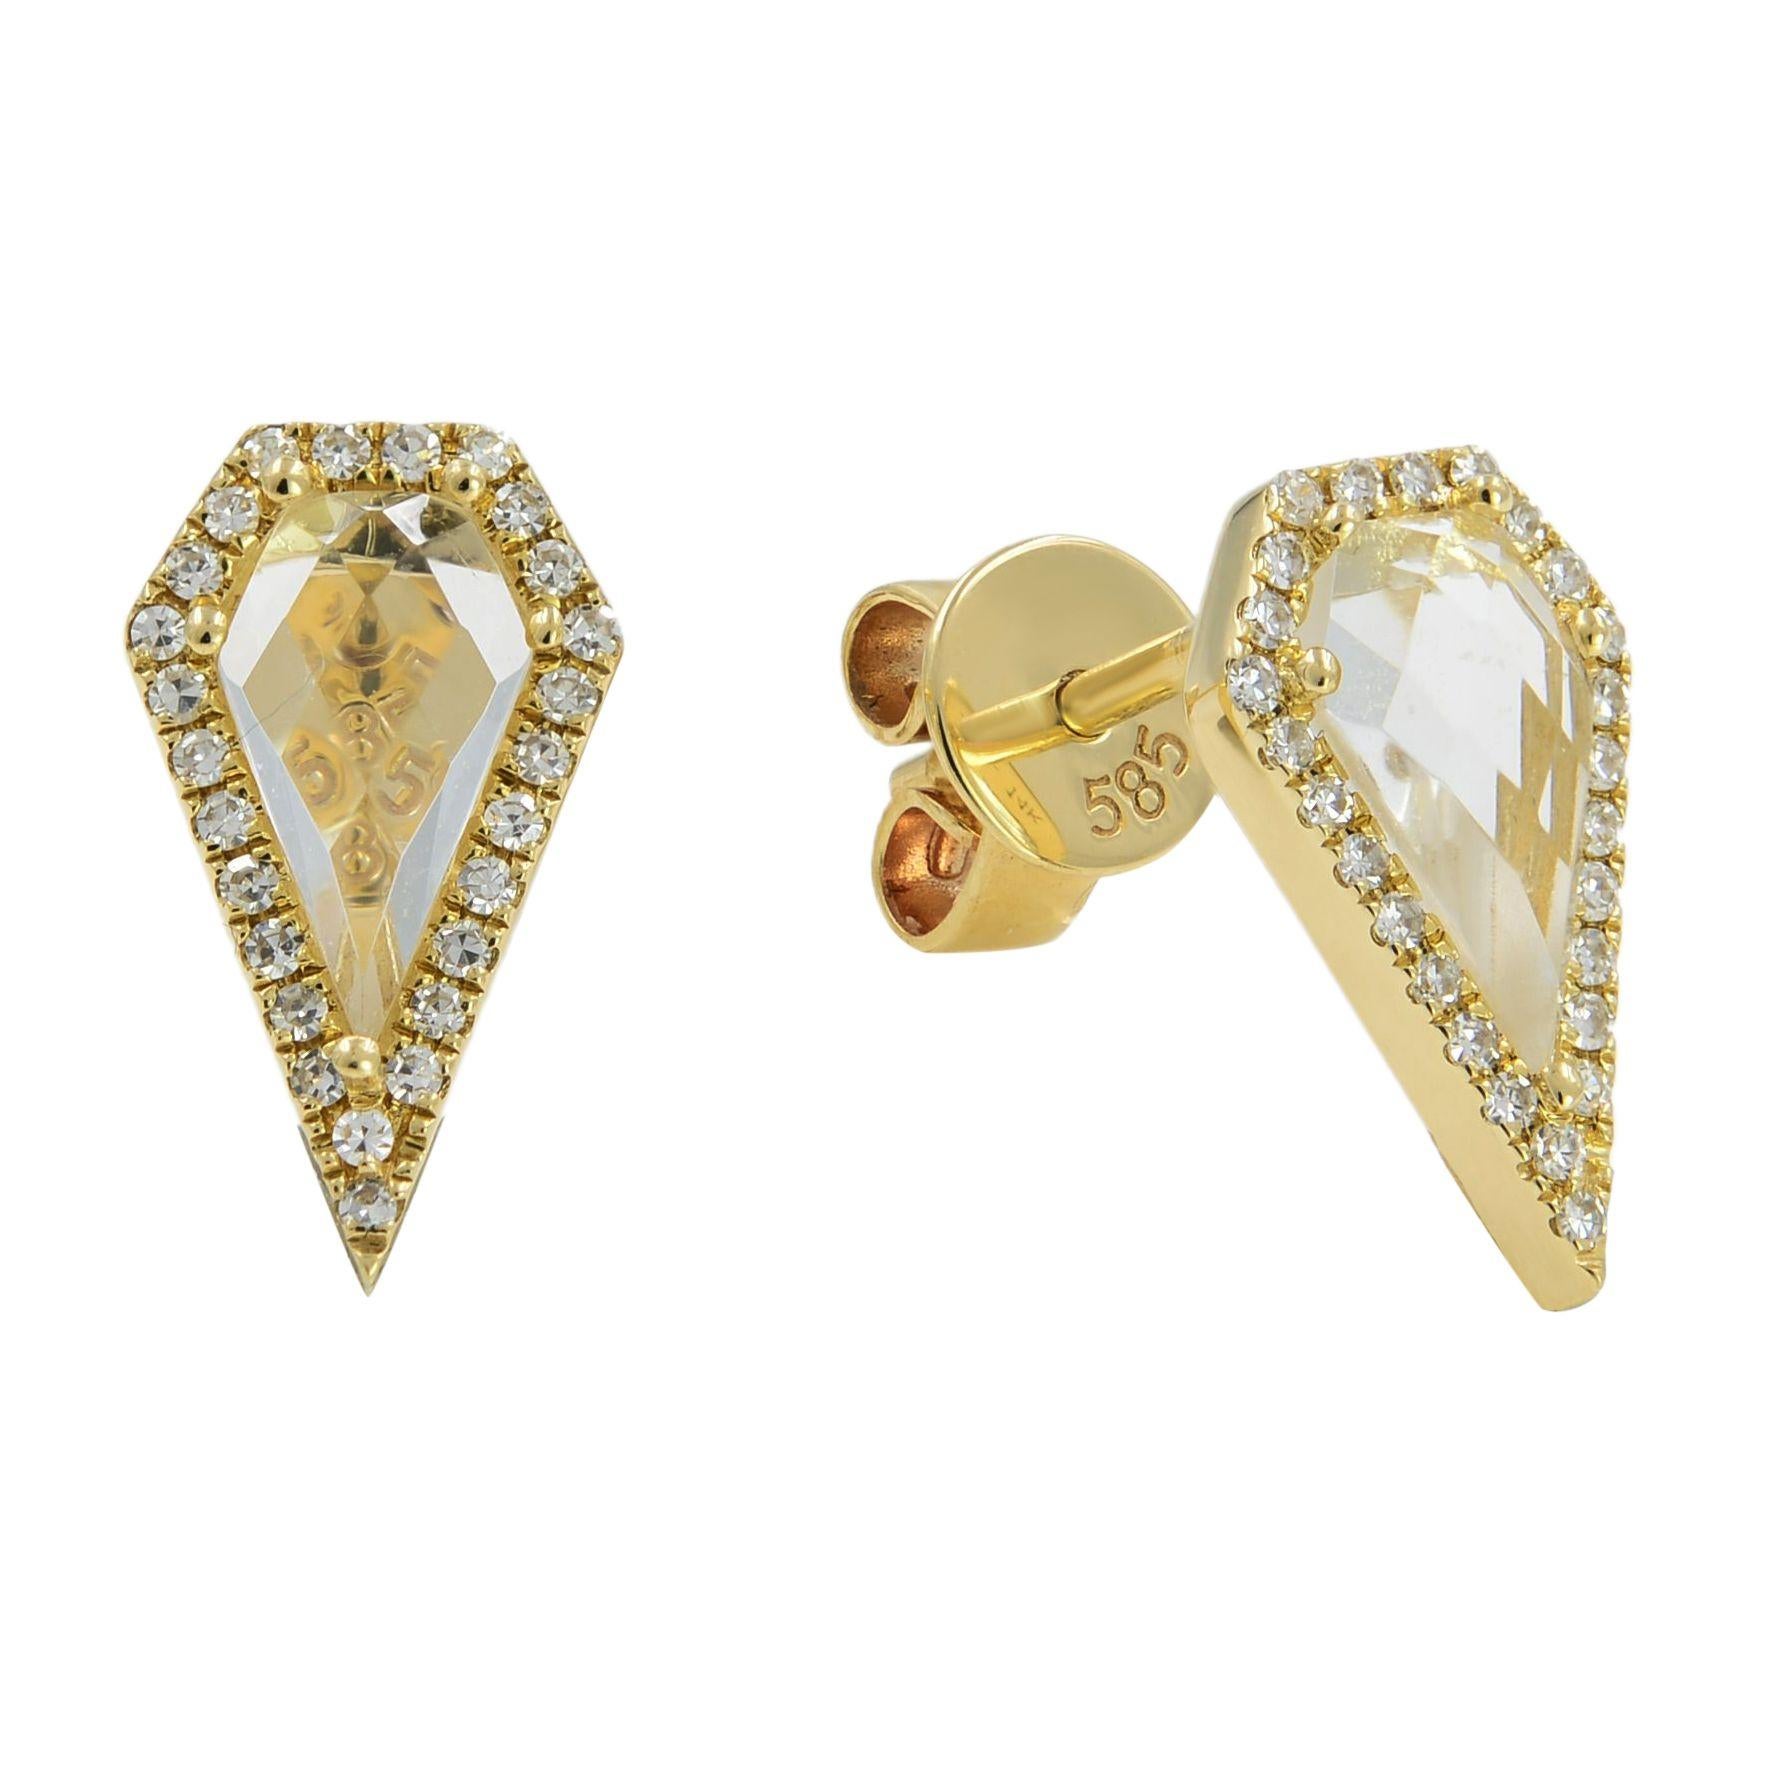 Round Cut Pave Diamond 0.12cttw and White Topaz 1.20cttw Earrings 14K Yellow Gold For Sale